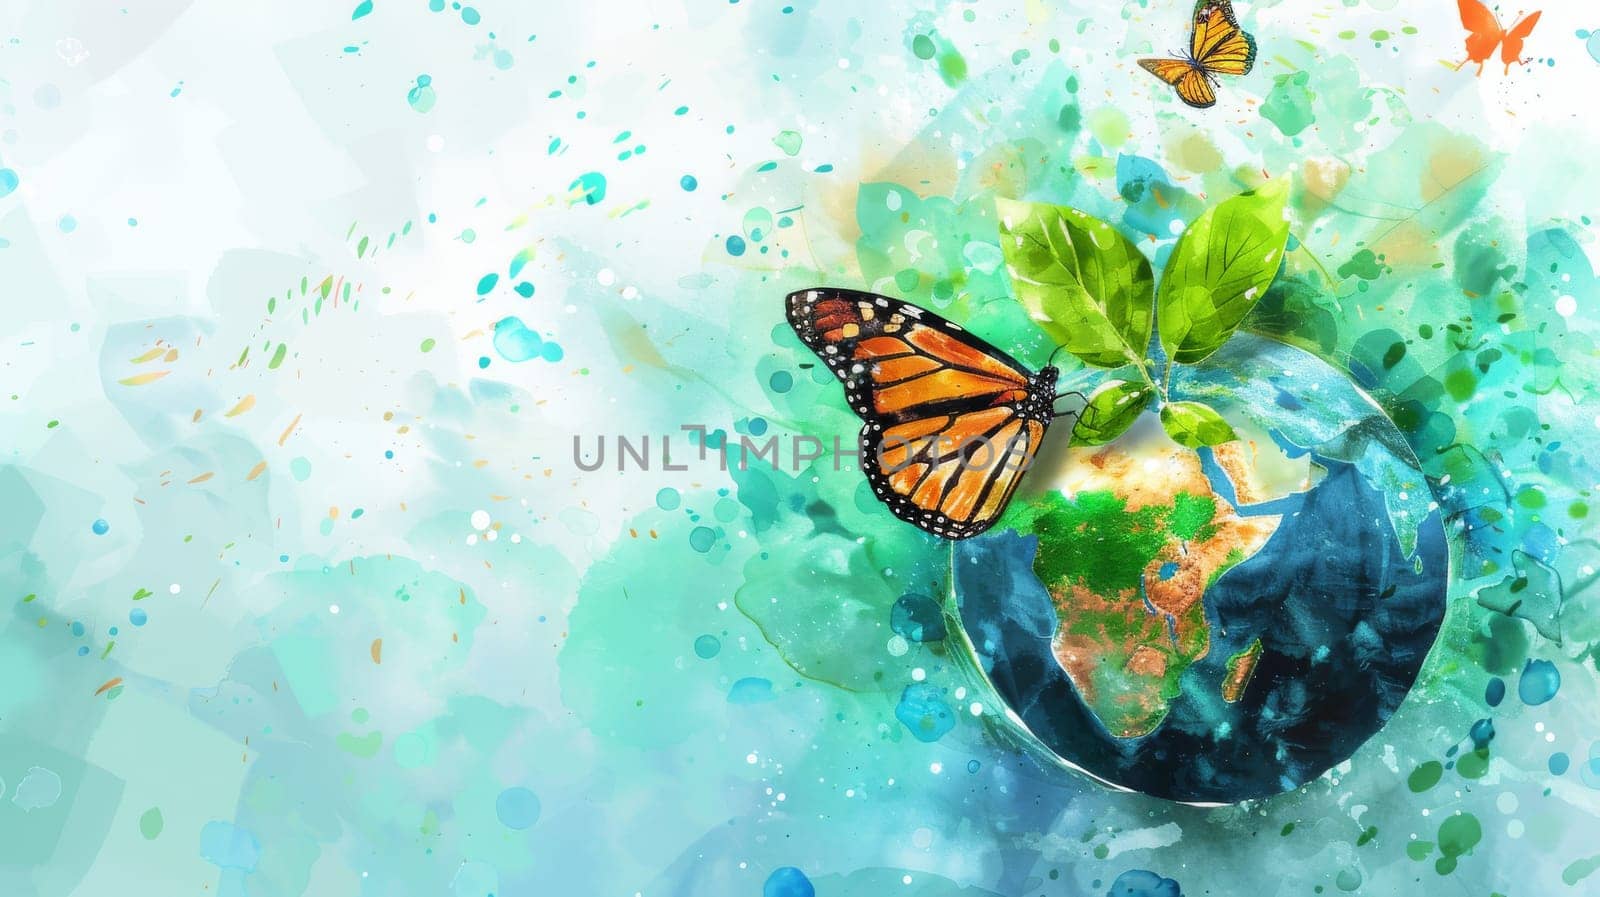 A modern illustration of an eco-friendly web design, banner, campaign, or social media post that represents World Environment Day. An illustration of a tree plant, butterfly, and a tree, with a